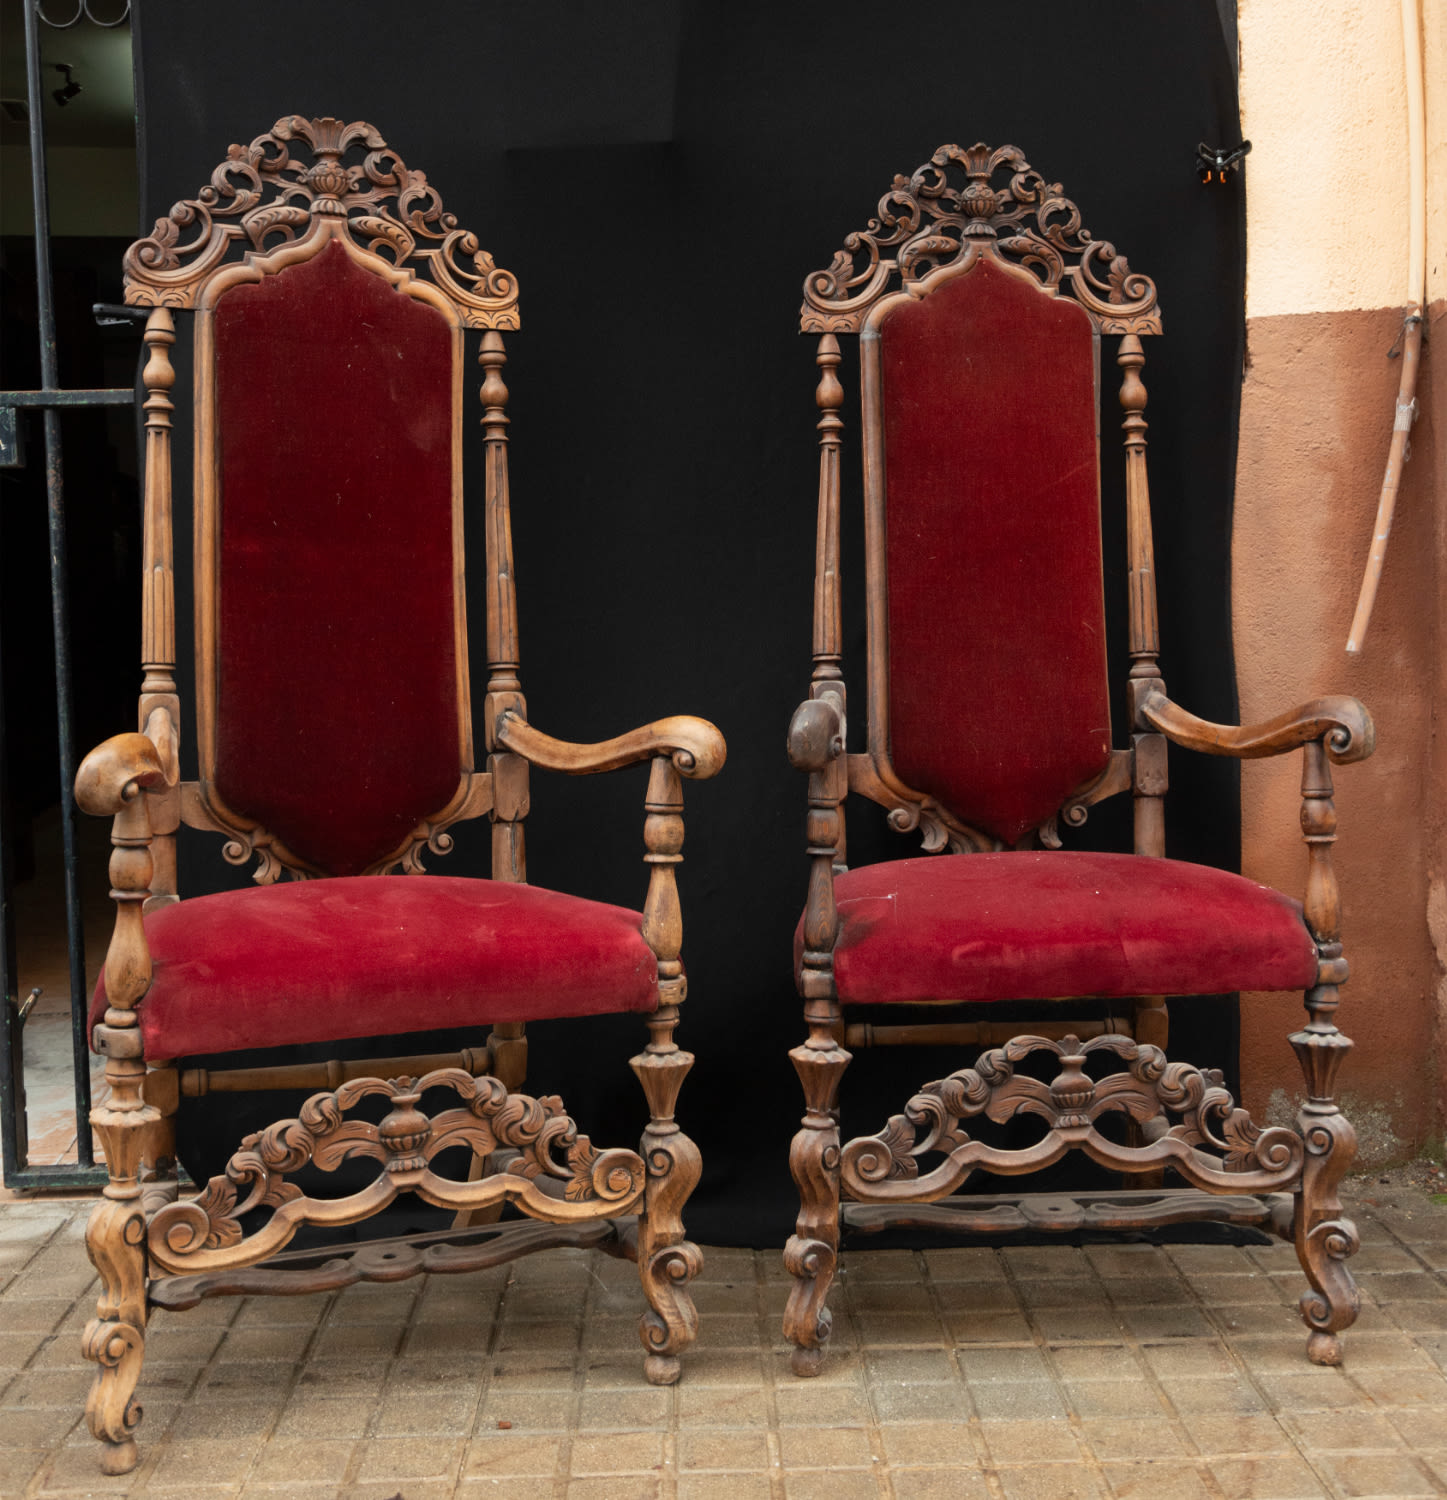 Pair of walnut armchairs from the 18th century. - Image 2 of 2